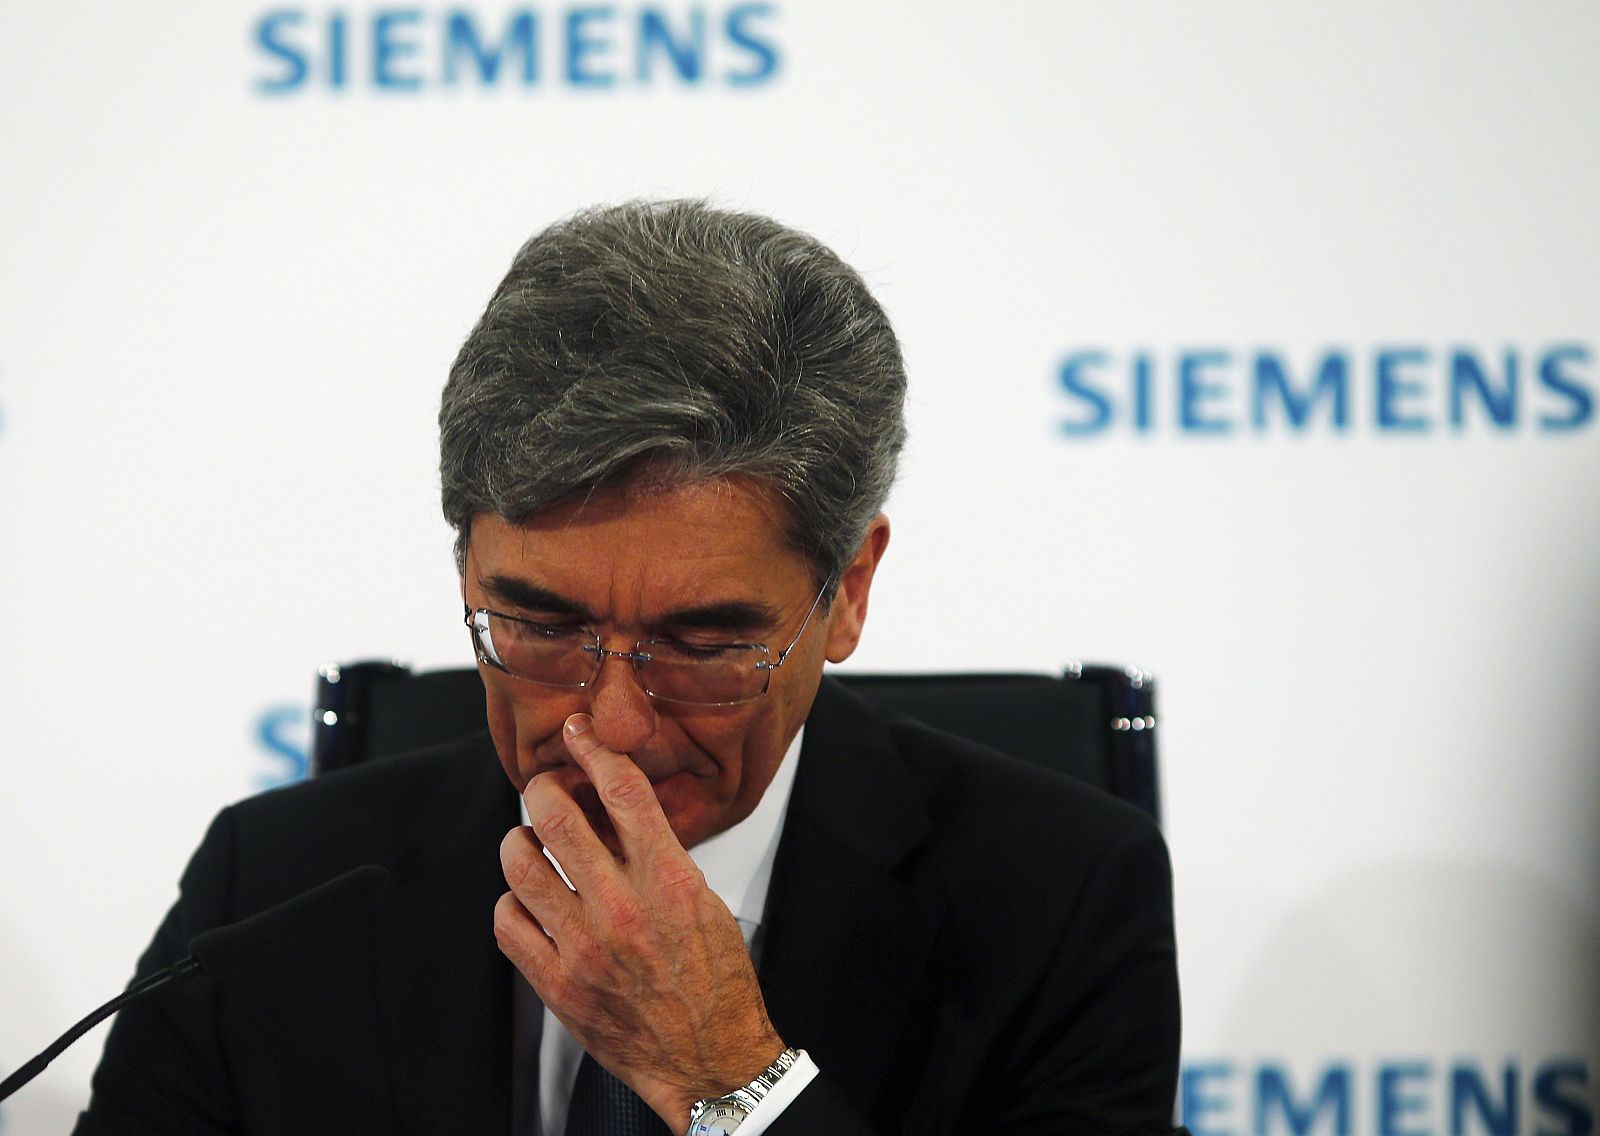 Kaeser, chief executive of German industrial group Siemens, addresses a news conference in Munich